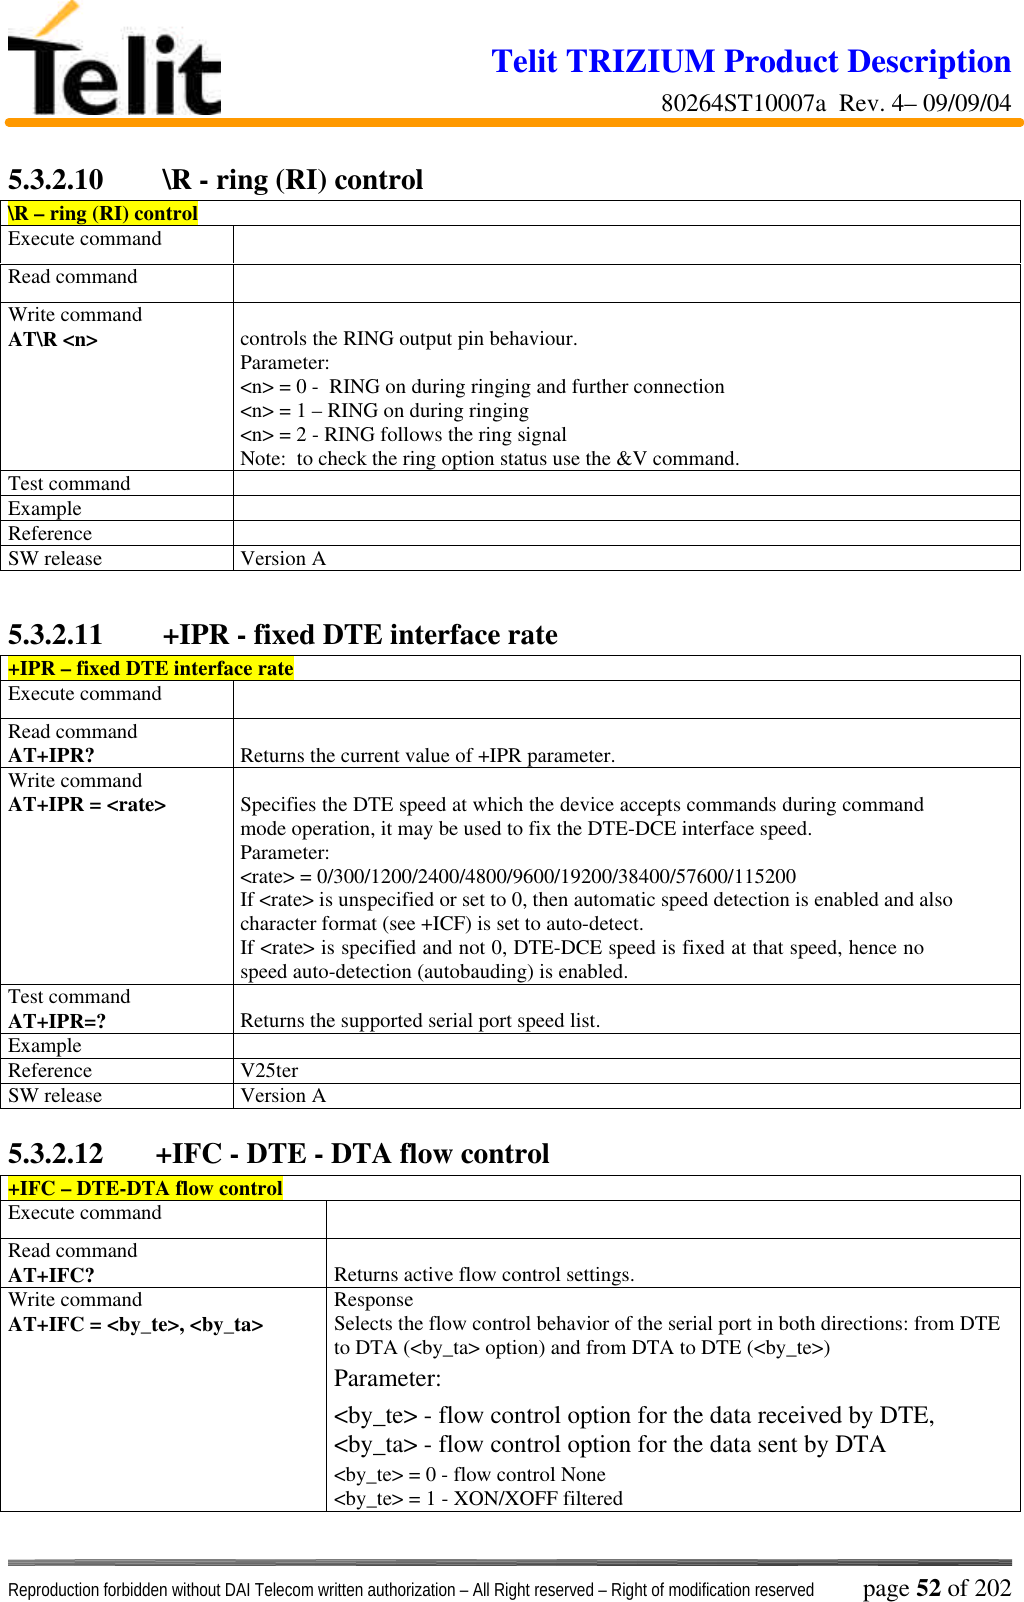 Telit TRIZIUM Product Description80264ST10007a  Rev. 4– 09/09/04Reproduction forbidden without DAI Telecom written authorization – All Right reserved – Right of modification reserved page 52 of 2025.3.2.10  \R - ring (RI) control\R – ring (RI) controlExecute commandRead commandWrite commandAT\R &lt;n&gt; controls the RING output pin behaviour.Parameter:&lt;n&gt; = 0 -  RING on during ringing and further connection&lt;n&gt; = 1 – RING on during ringing&lt;n&gt; = 2 - RING follows the ring signalNote:  to check the ring option status use the &amp;V command.Test commandExampleReferenceSW release Version A5.3.2.11  +IPR - fixed DTE interface rate+IPR – fixed DTE interface rateExecute commandRead commandAT+IPR? Returns the current value of +IPR parameter.Write commandAT+IPR = &lt;rate&gt; Specifies the DTE speed at which the device accepts commands during commandmode operation, it may be used to fix the DTE-DCE interface speed.Parameter:&lt;rate&gt; = 0/300/1200/2400/4800/9600/19200/38400/57600/115200If &lt;rate&gt; is unspecified or set to 0, then automatic speed detection is enabled and alsocharacter format (see +ICF) is set to auto-detect.If &lt;rate&gt; is specified and not 0, DTE-DCE speed is fixed at that speed, hence nospeed auto-detection (autobauding) is enabled.Test commandAT+IPR=? Returns the supported serial port speed list.ExampleReference V25terSW release Version A5.3.2.12 +IFC - DTE - DTA flow control+IFC – DTE-DTA flow controlExecute commandRead commandAT+IFC? Returns active flow control settings.Write commandAT+IFC = &lt;by_te&gt;, &lt;by_ta&gt; ResponseSelects the flow control behavior of the serial port in both directions: from DTEto DTA (&lt;by_ta&gt; option) and from DTA to DTE (&lt;by_te&gt;)Parameter:&lt;by_te&gt; - flow control option for the data received by DTE,&lt;by_ta&gt; - flow control option for the data sent by DTA&lt;by_te&gt; = 0 - flow control None&lt;by_te&gt; = 1 - XON/XOFF filtered